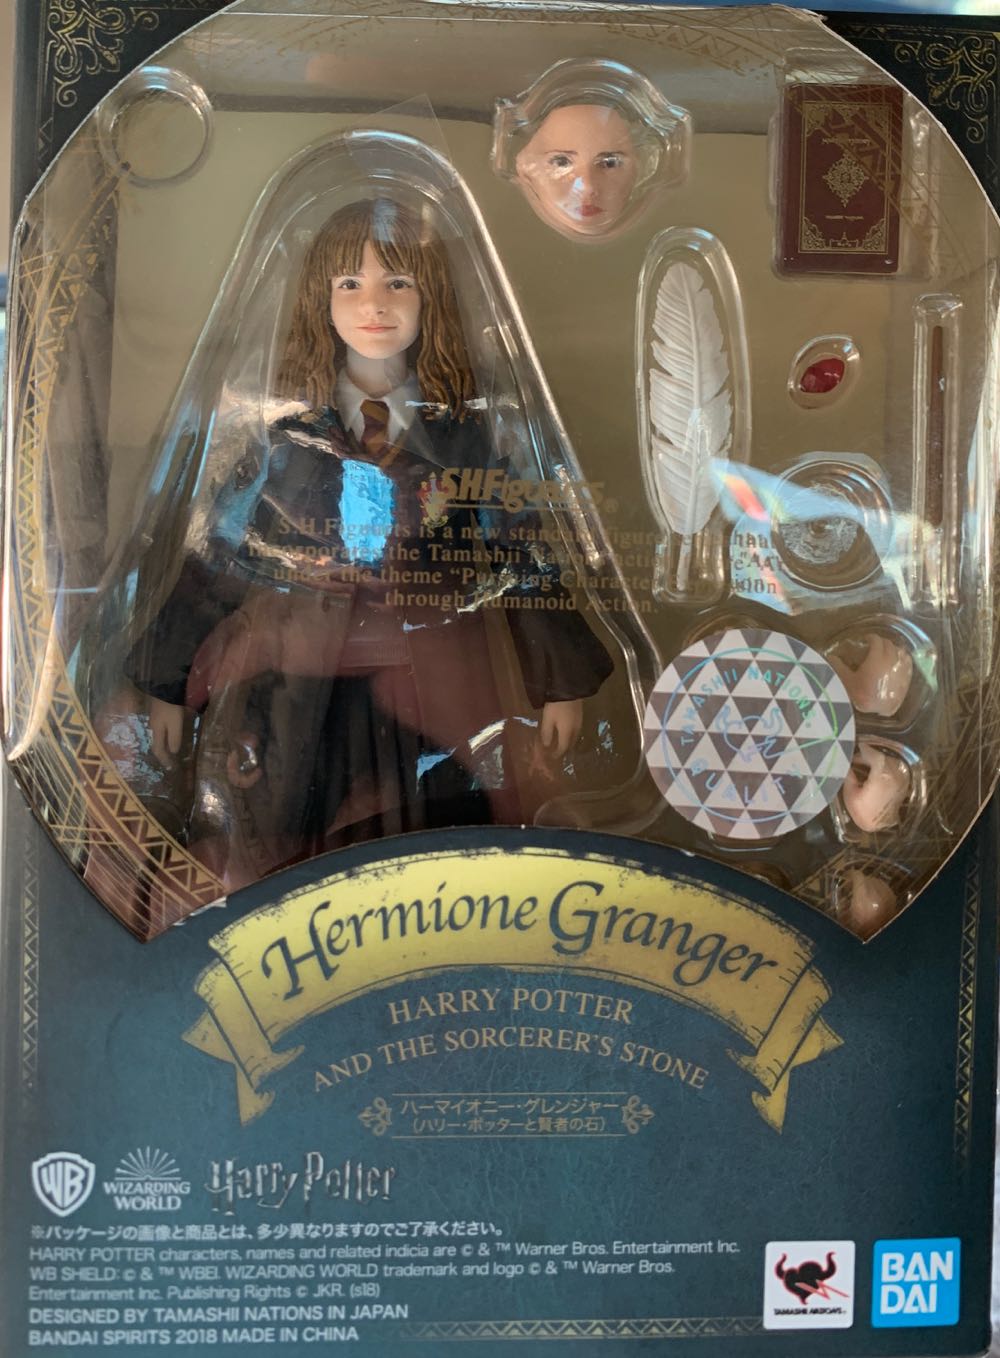 Hermione Granger - Bandai Spirits (Harry Potter And The Sorcere’s Stone) action figure collectible [Barcode 4573102551344] - Main Image 1